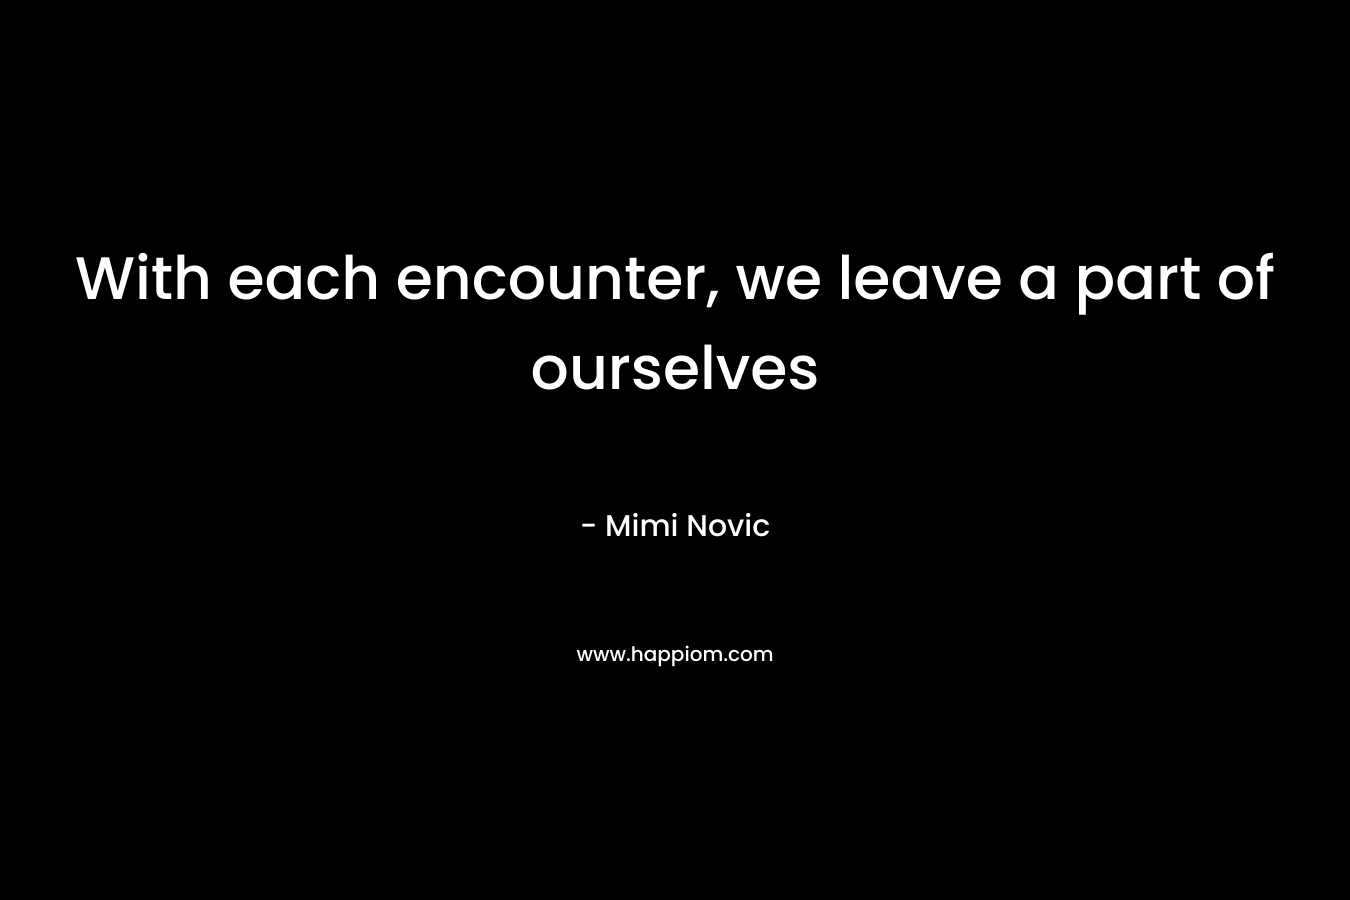 With each encounter, we leave a part of ourselves – Mimi Novic